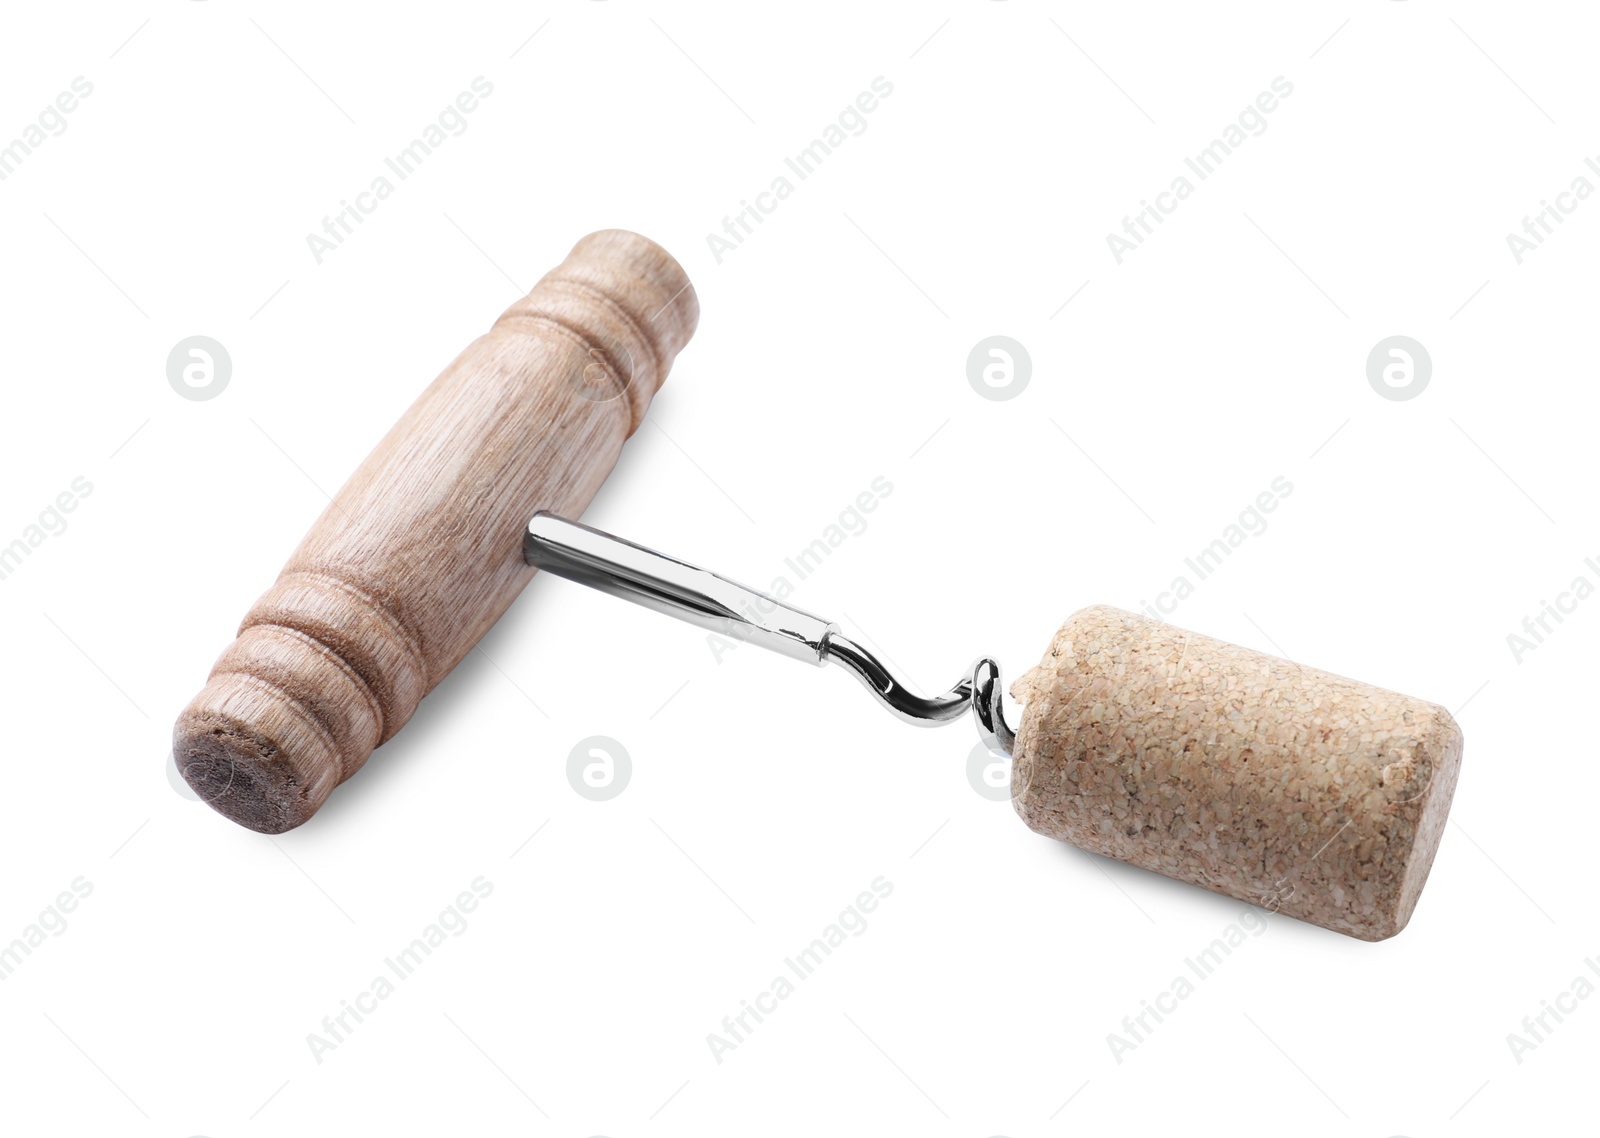 Photo of Corkscrew and wine bottle stopper isolated on white